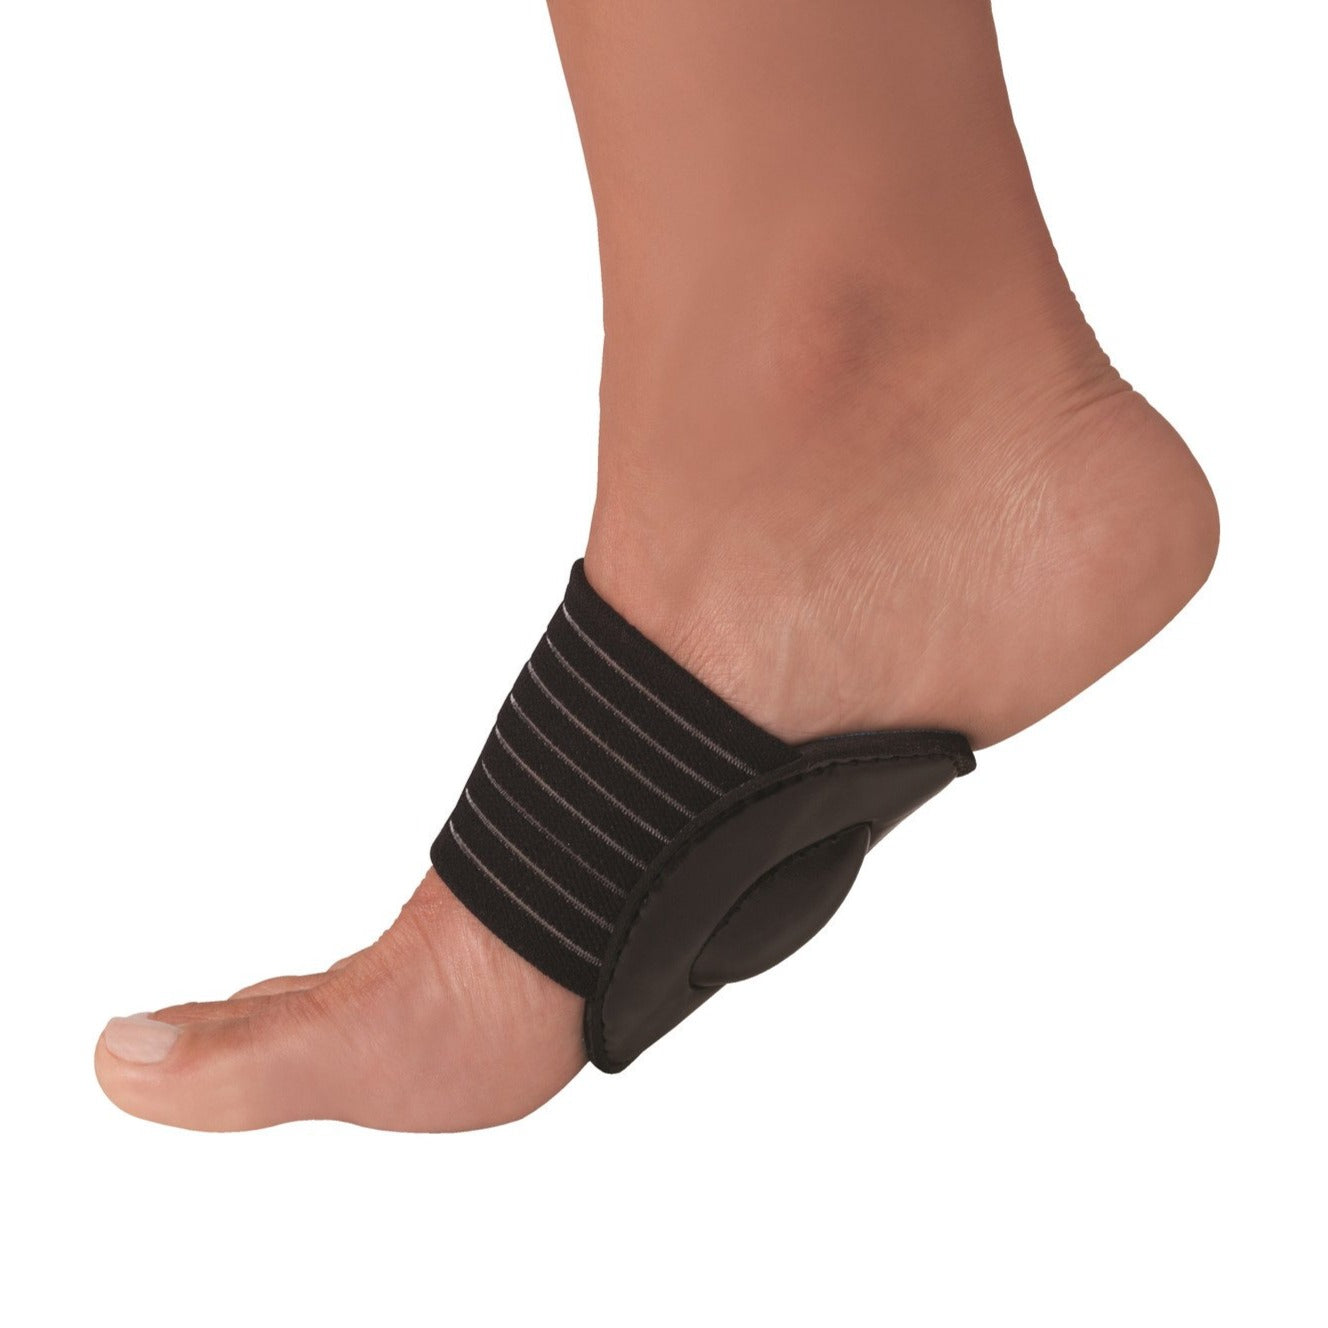 cushion arch support